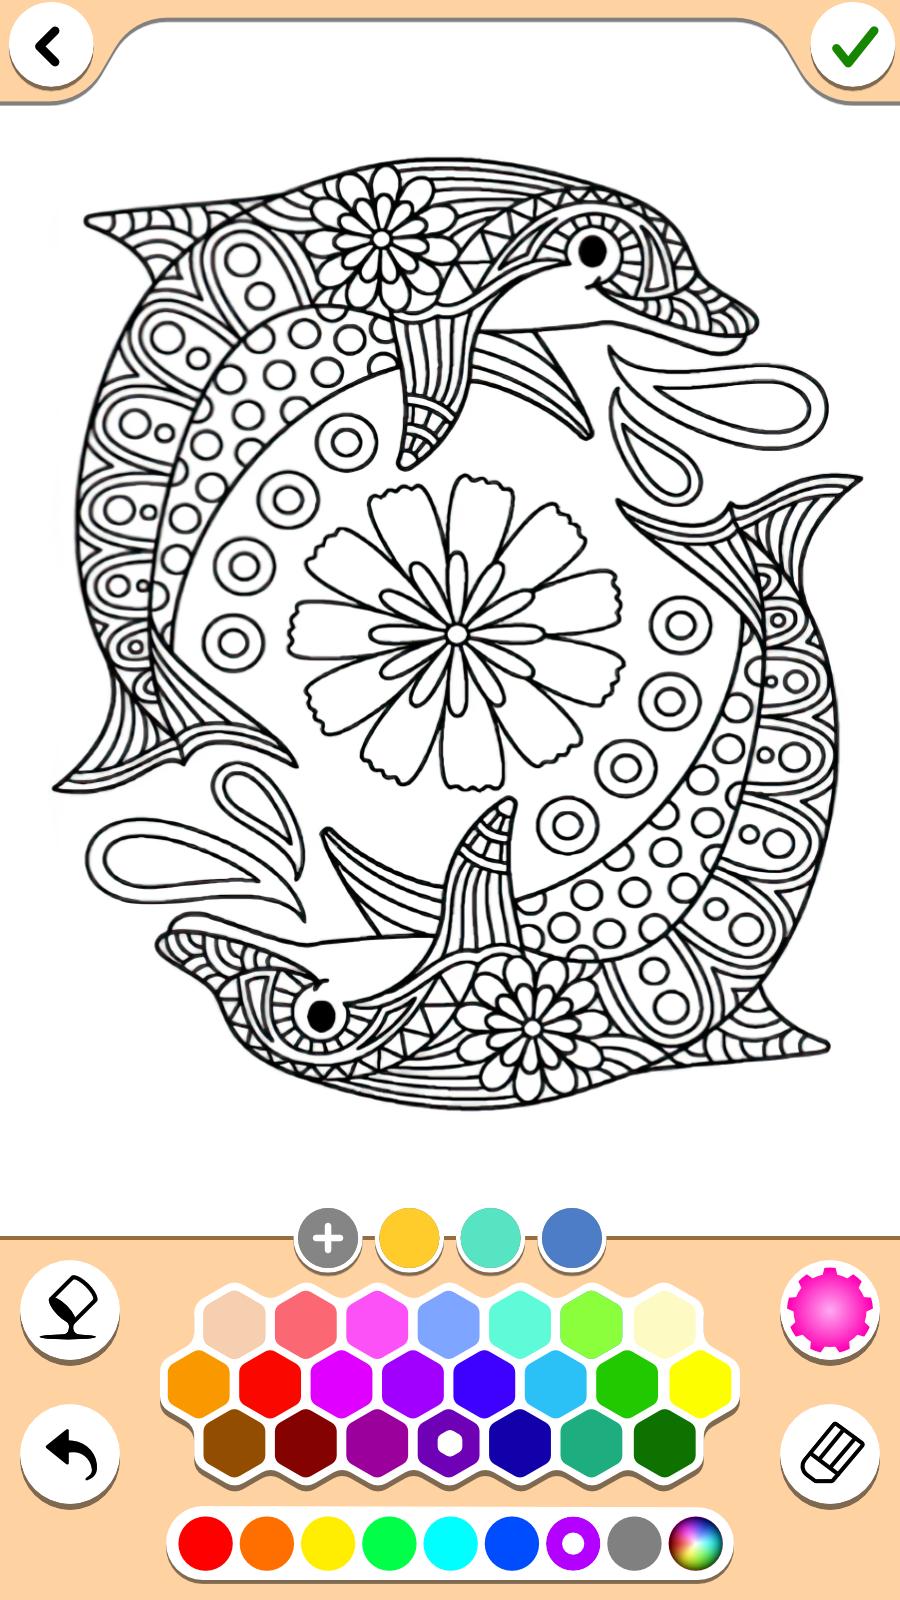 Download Mandala Coloring Pages For Android Apk Download